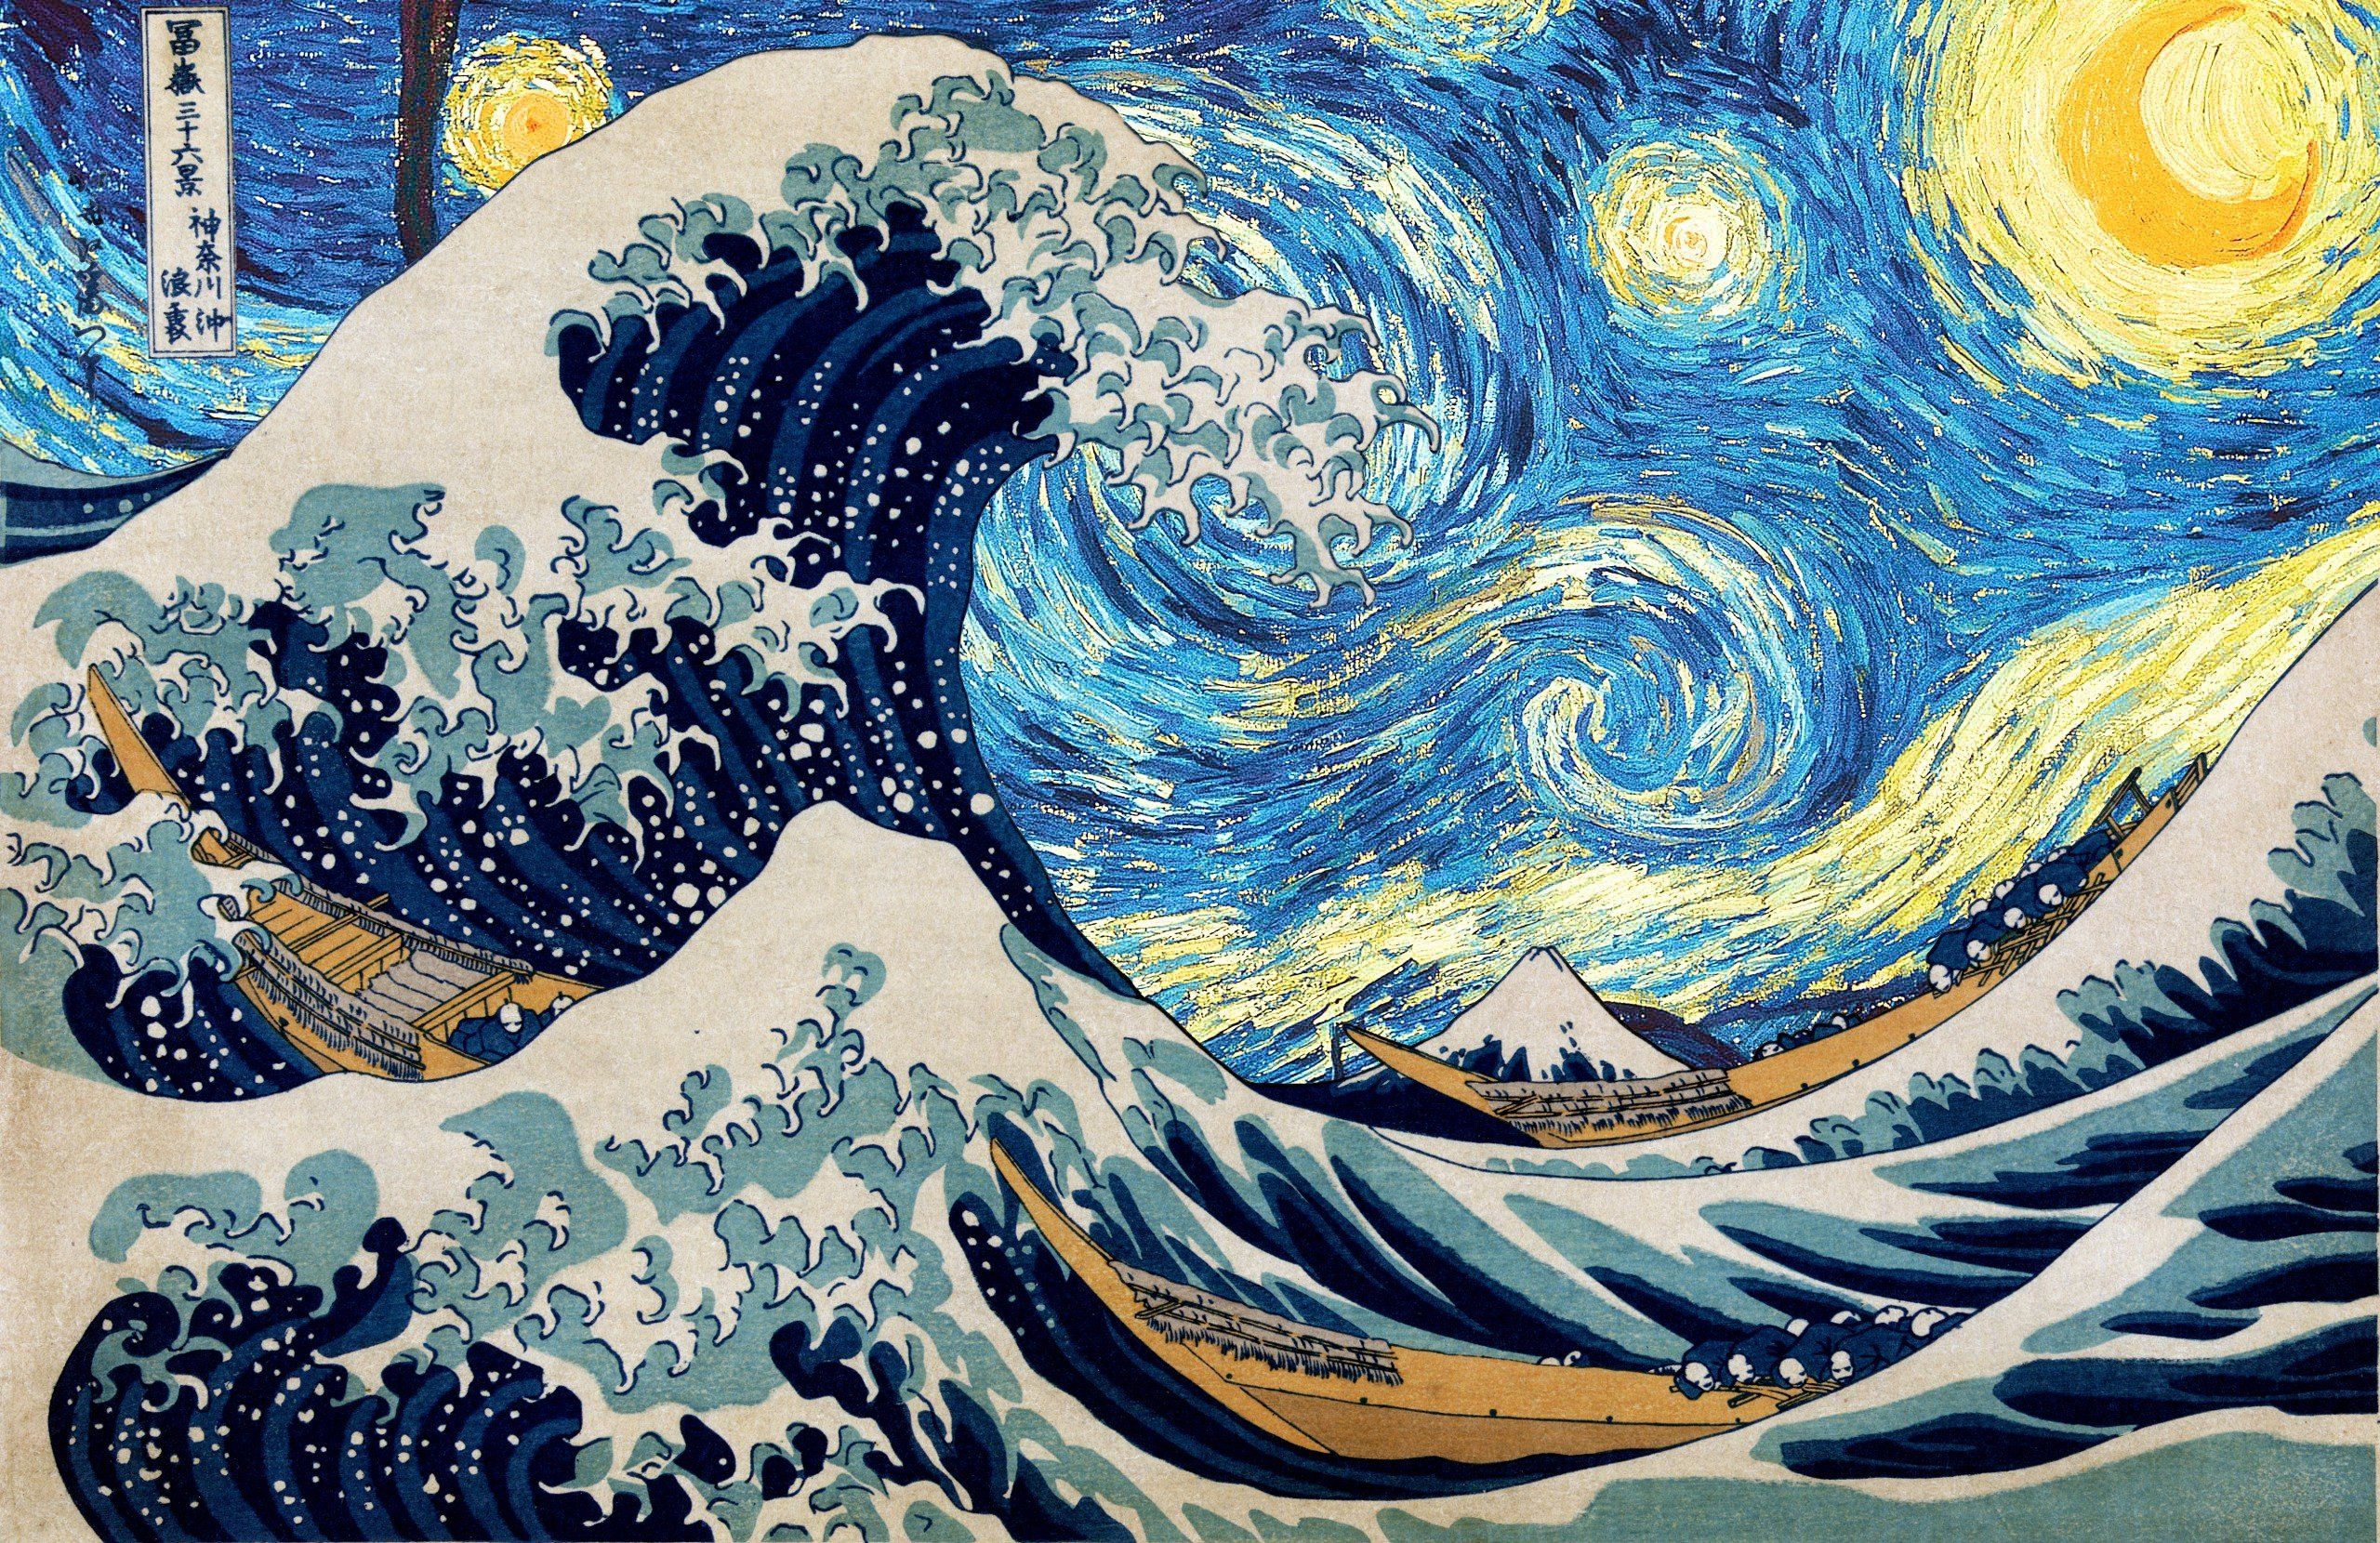 Vincent van Gogh, Hokusai, Starry night, The Great Wave off